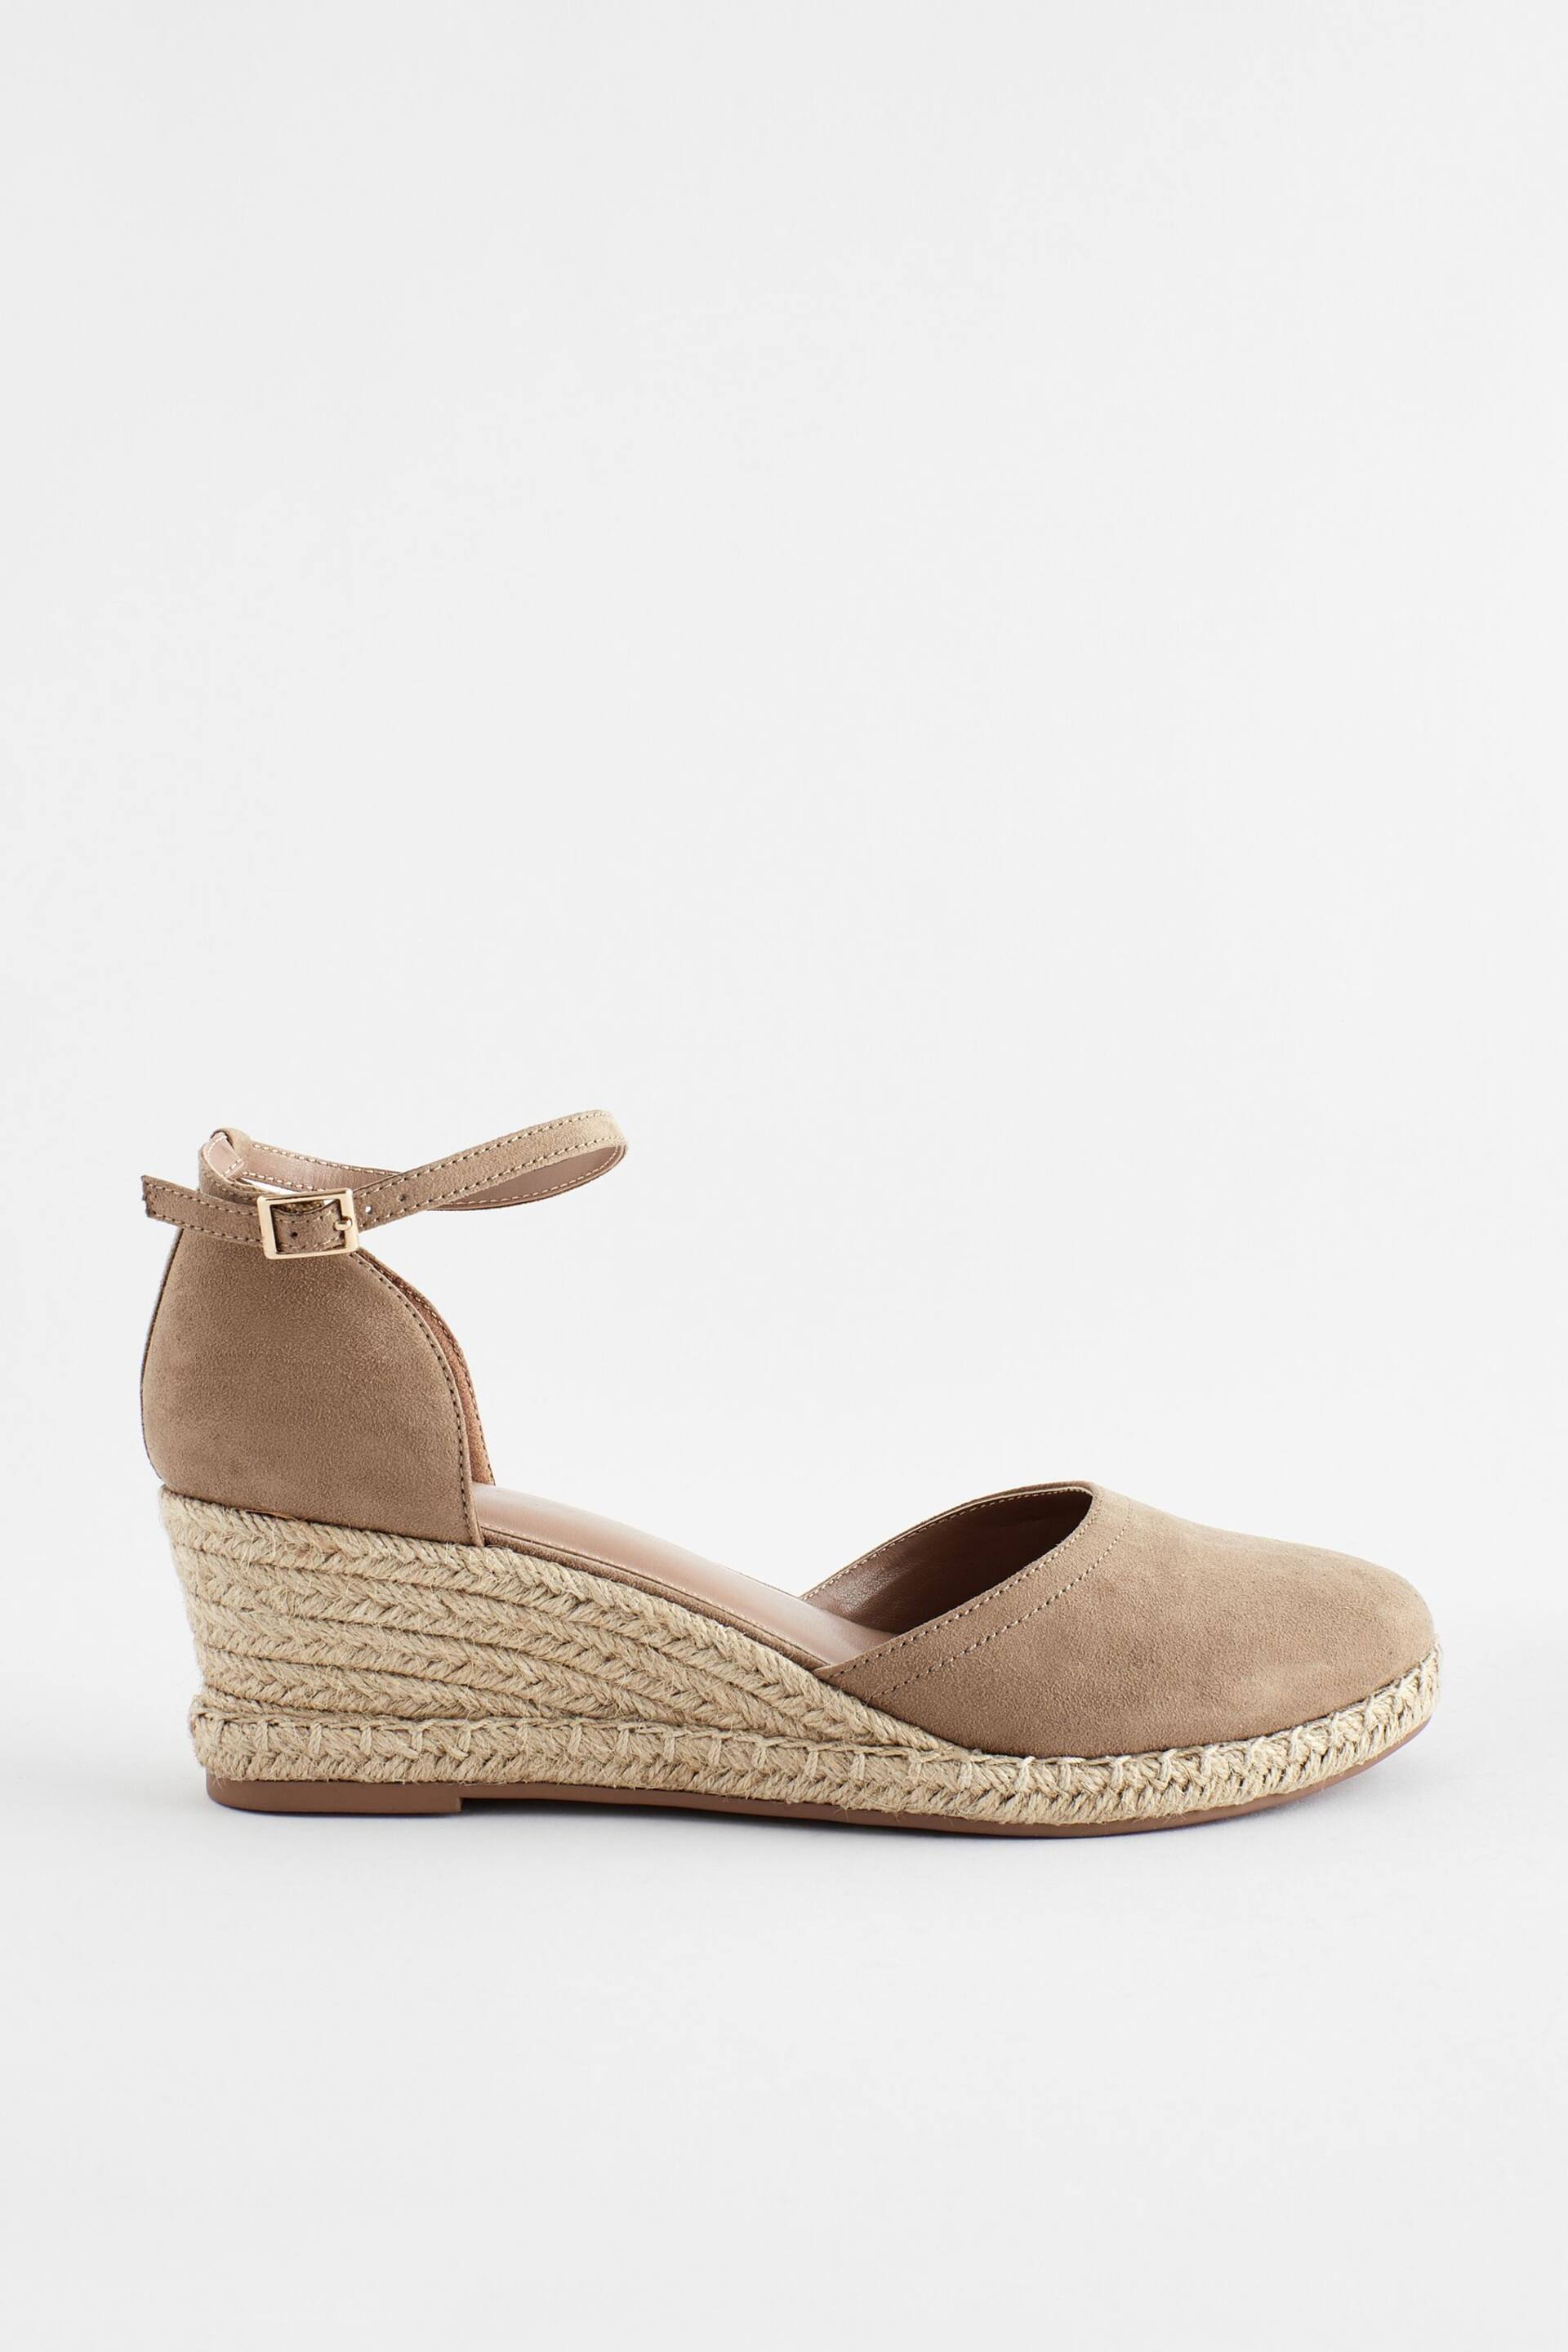 Sand Forever Comfort® Closed Toe Wedges - Image 4 of 9